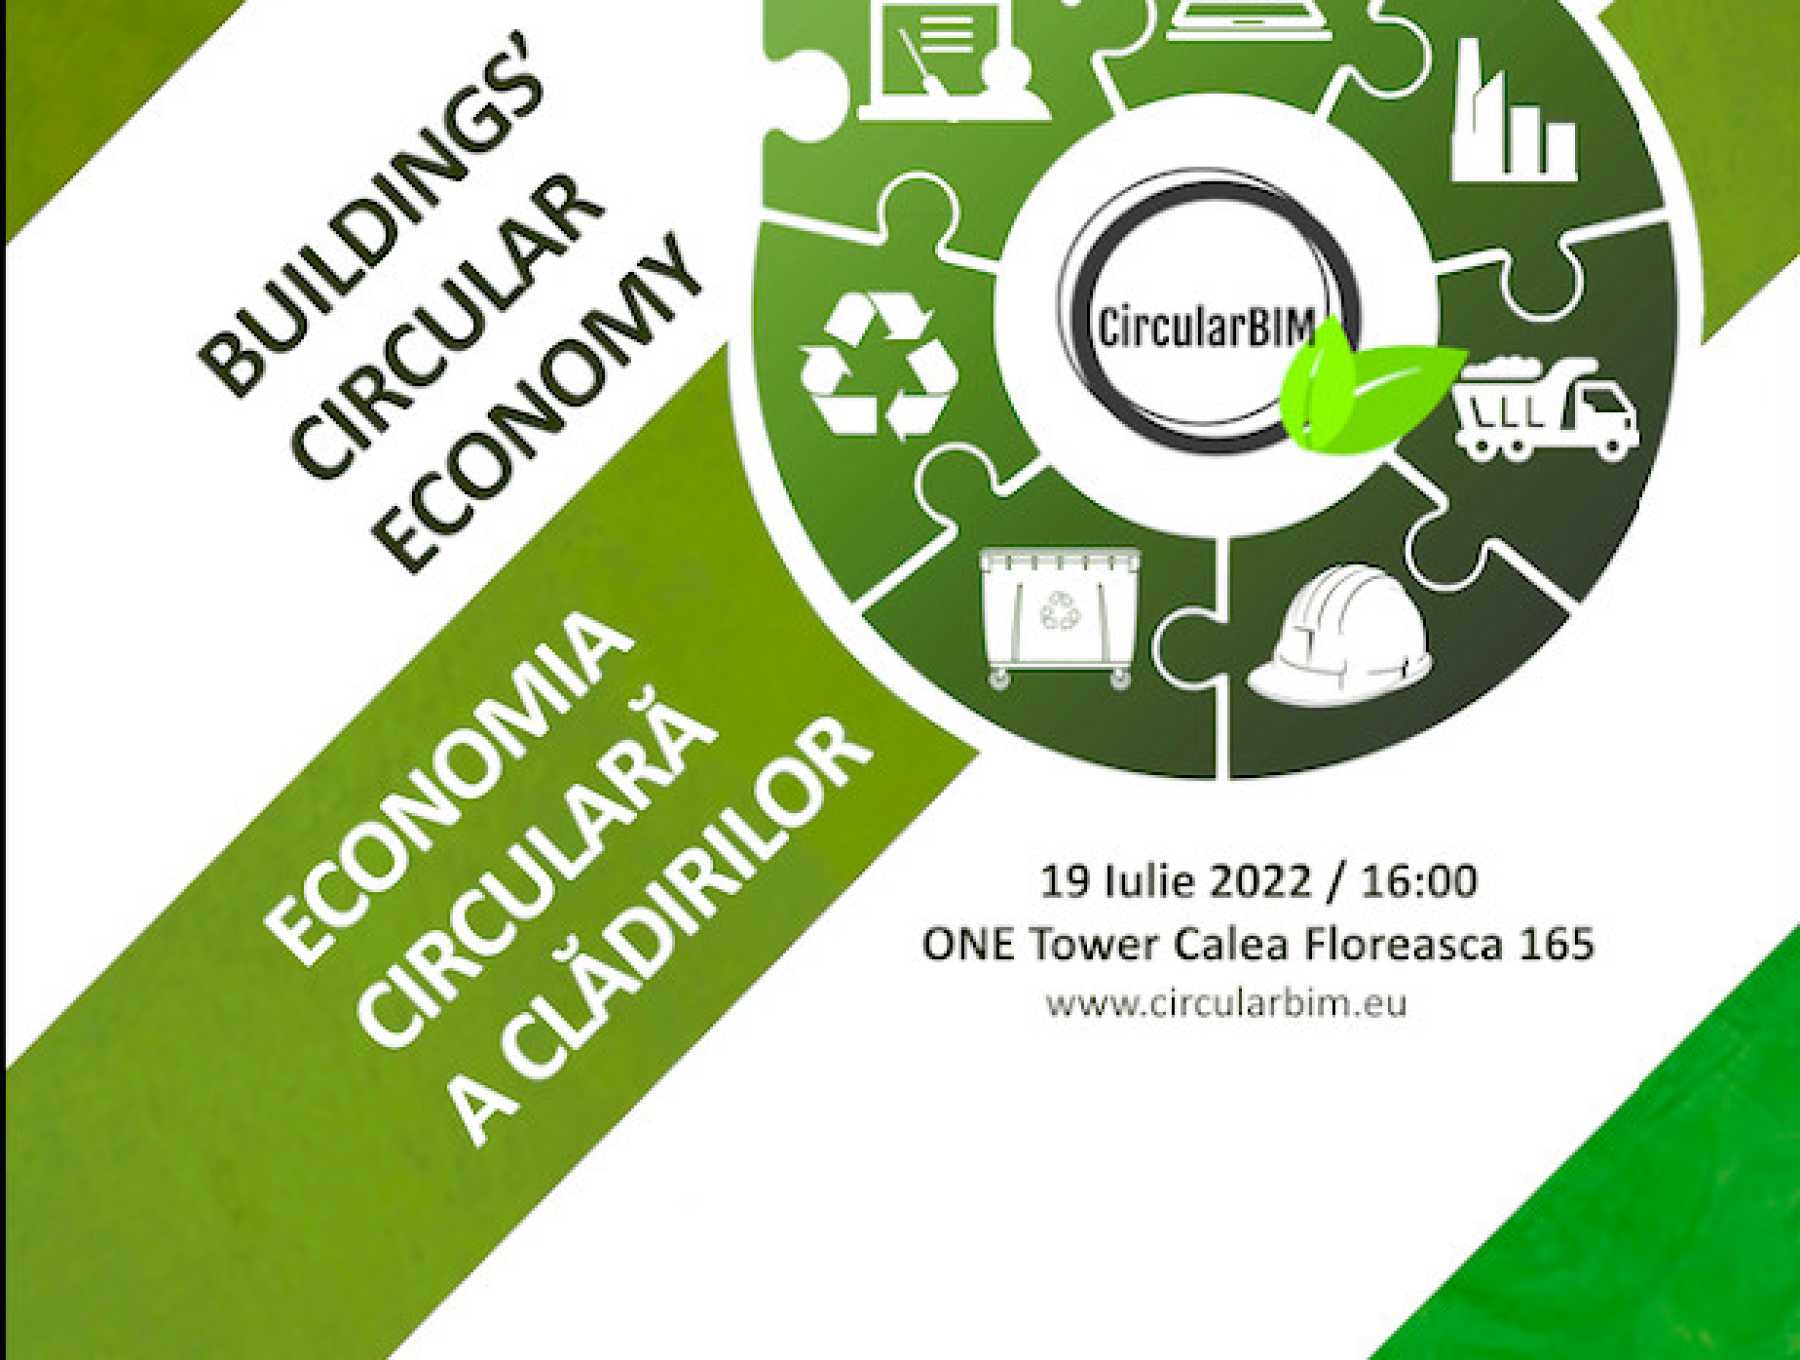 One United Properties Green Houses, case study at the "Buildings' Circular Economy" seminar